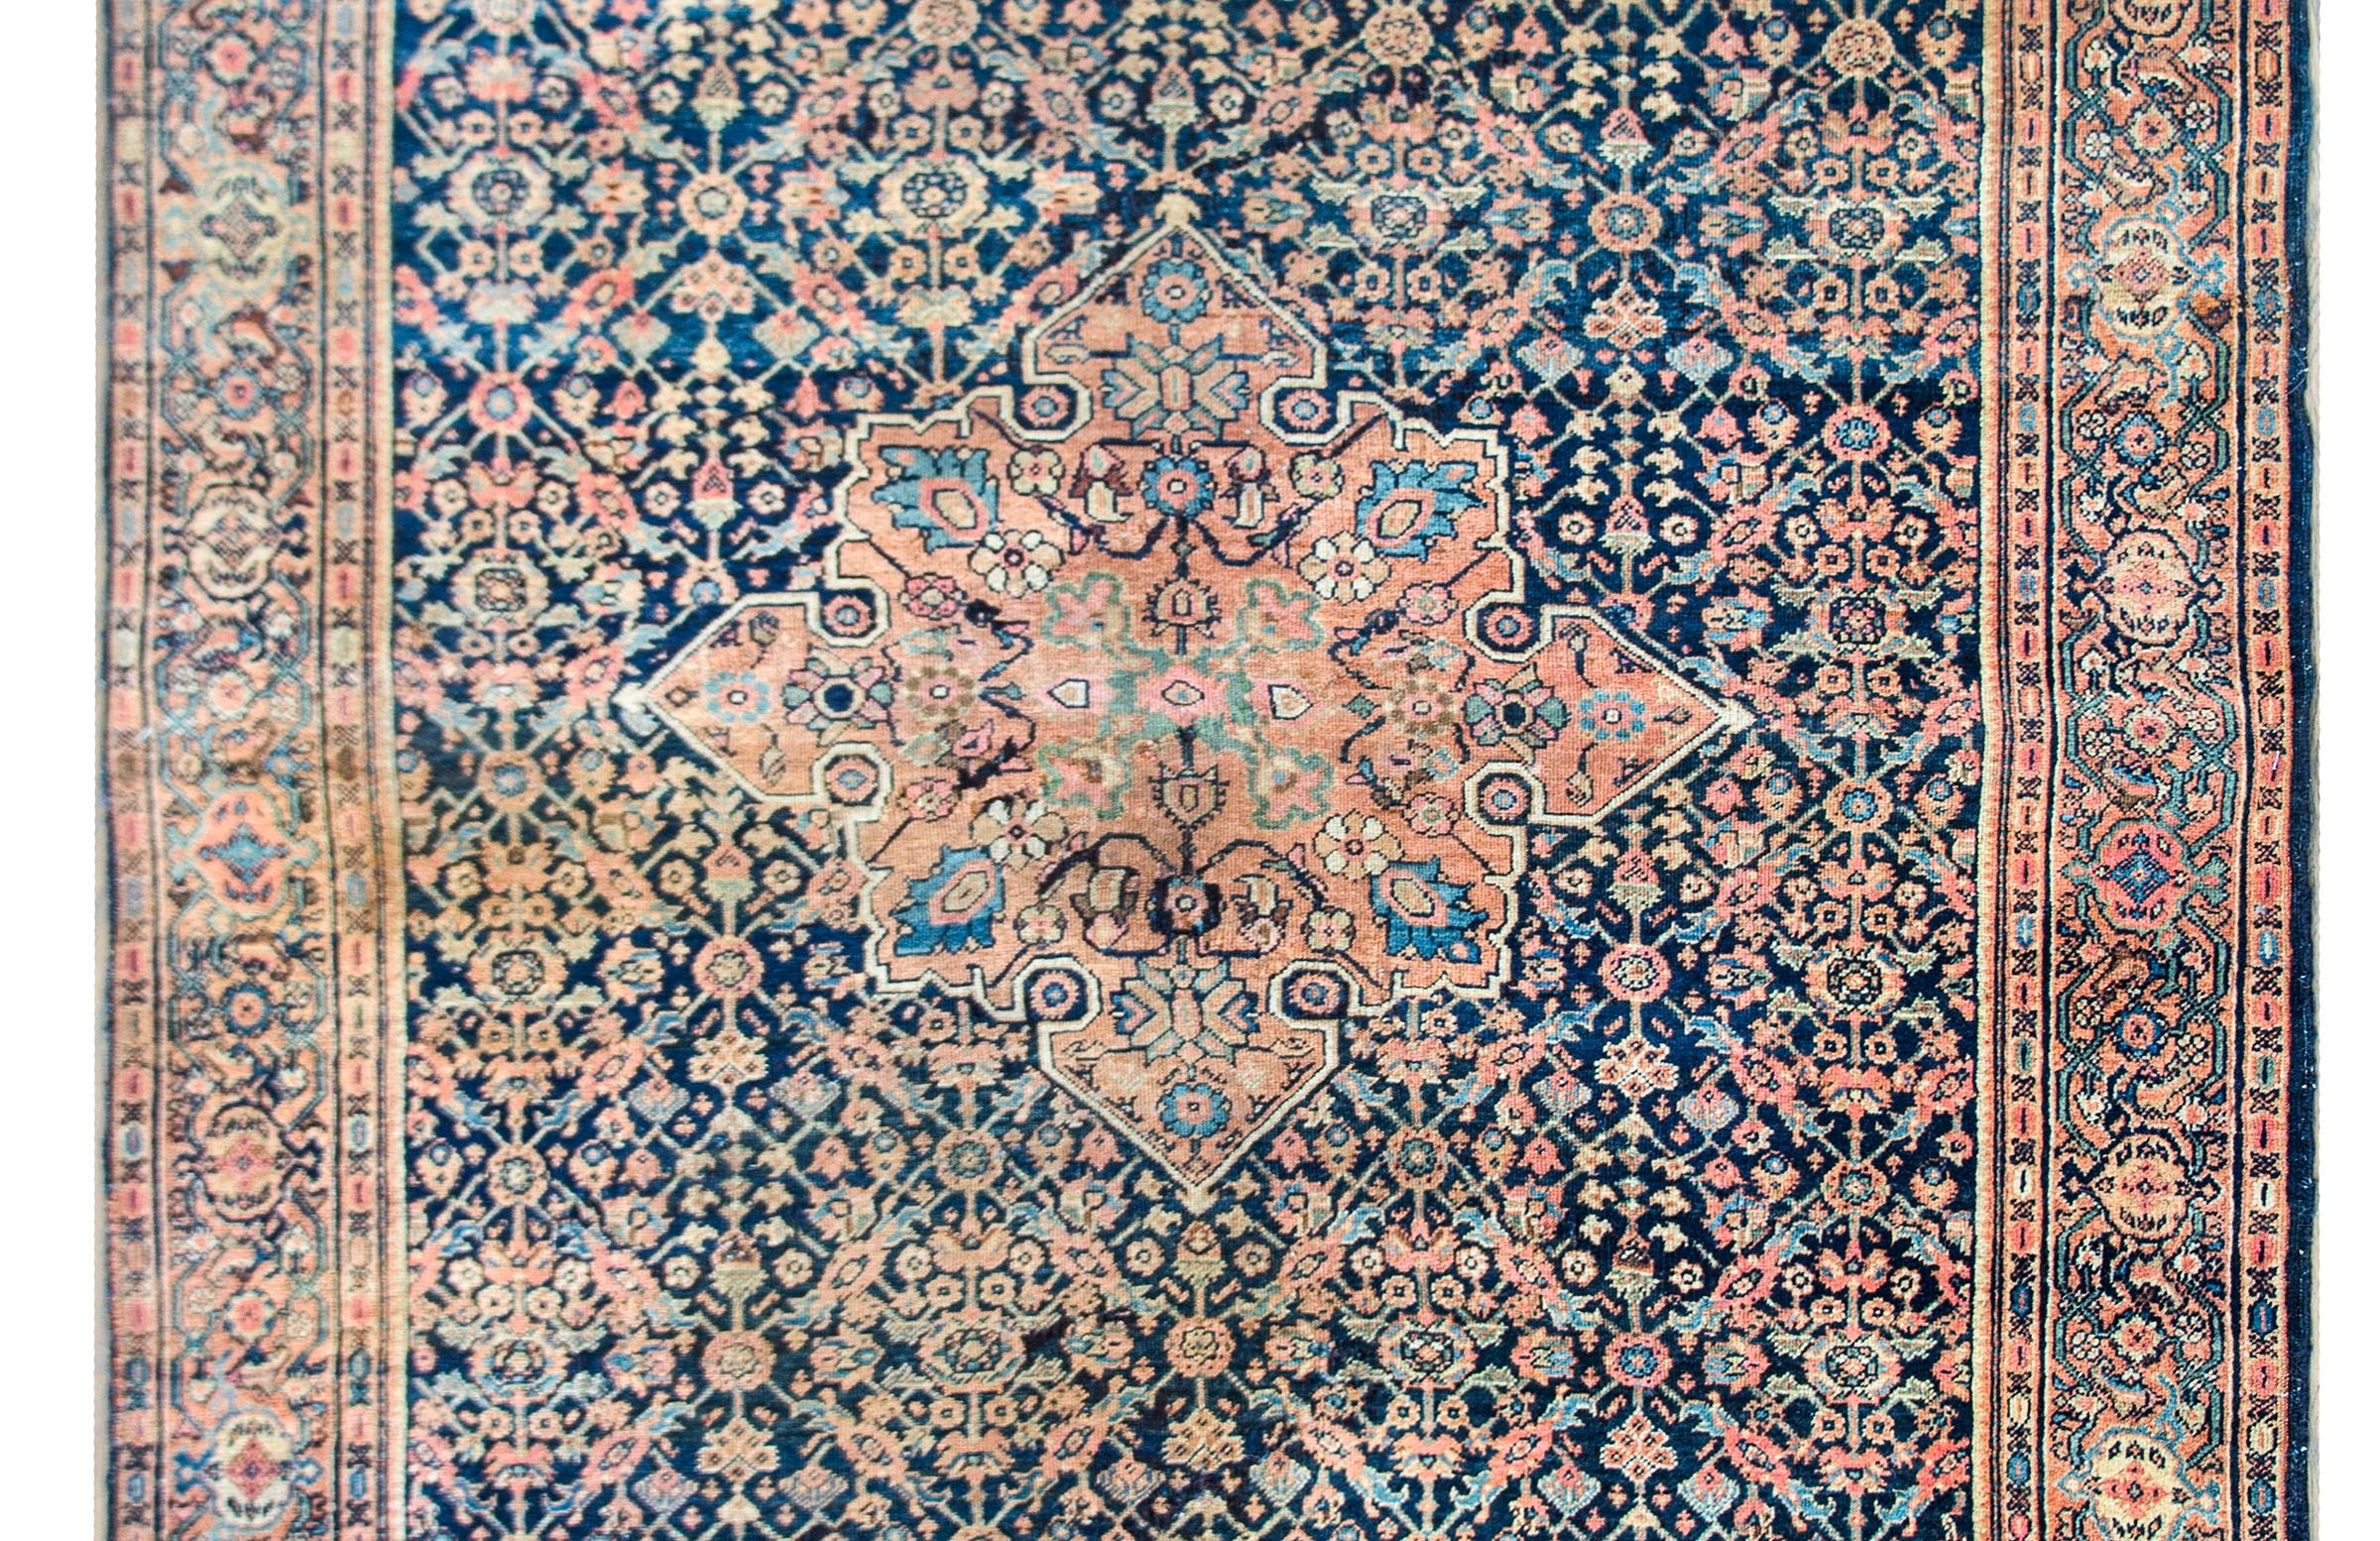 An incredible early 20th century Persian Sarouk Farahan rug with a large central floral medallion living in a trellised field of more flowers and surrounded by a complex border of even more stylized flowers and pomegranates, all woven in wonderful